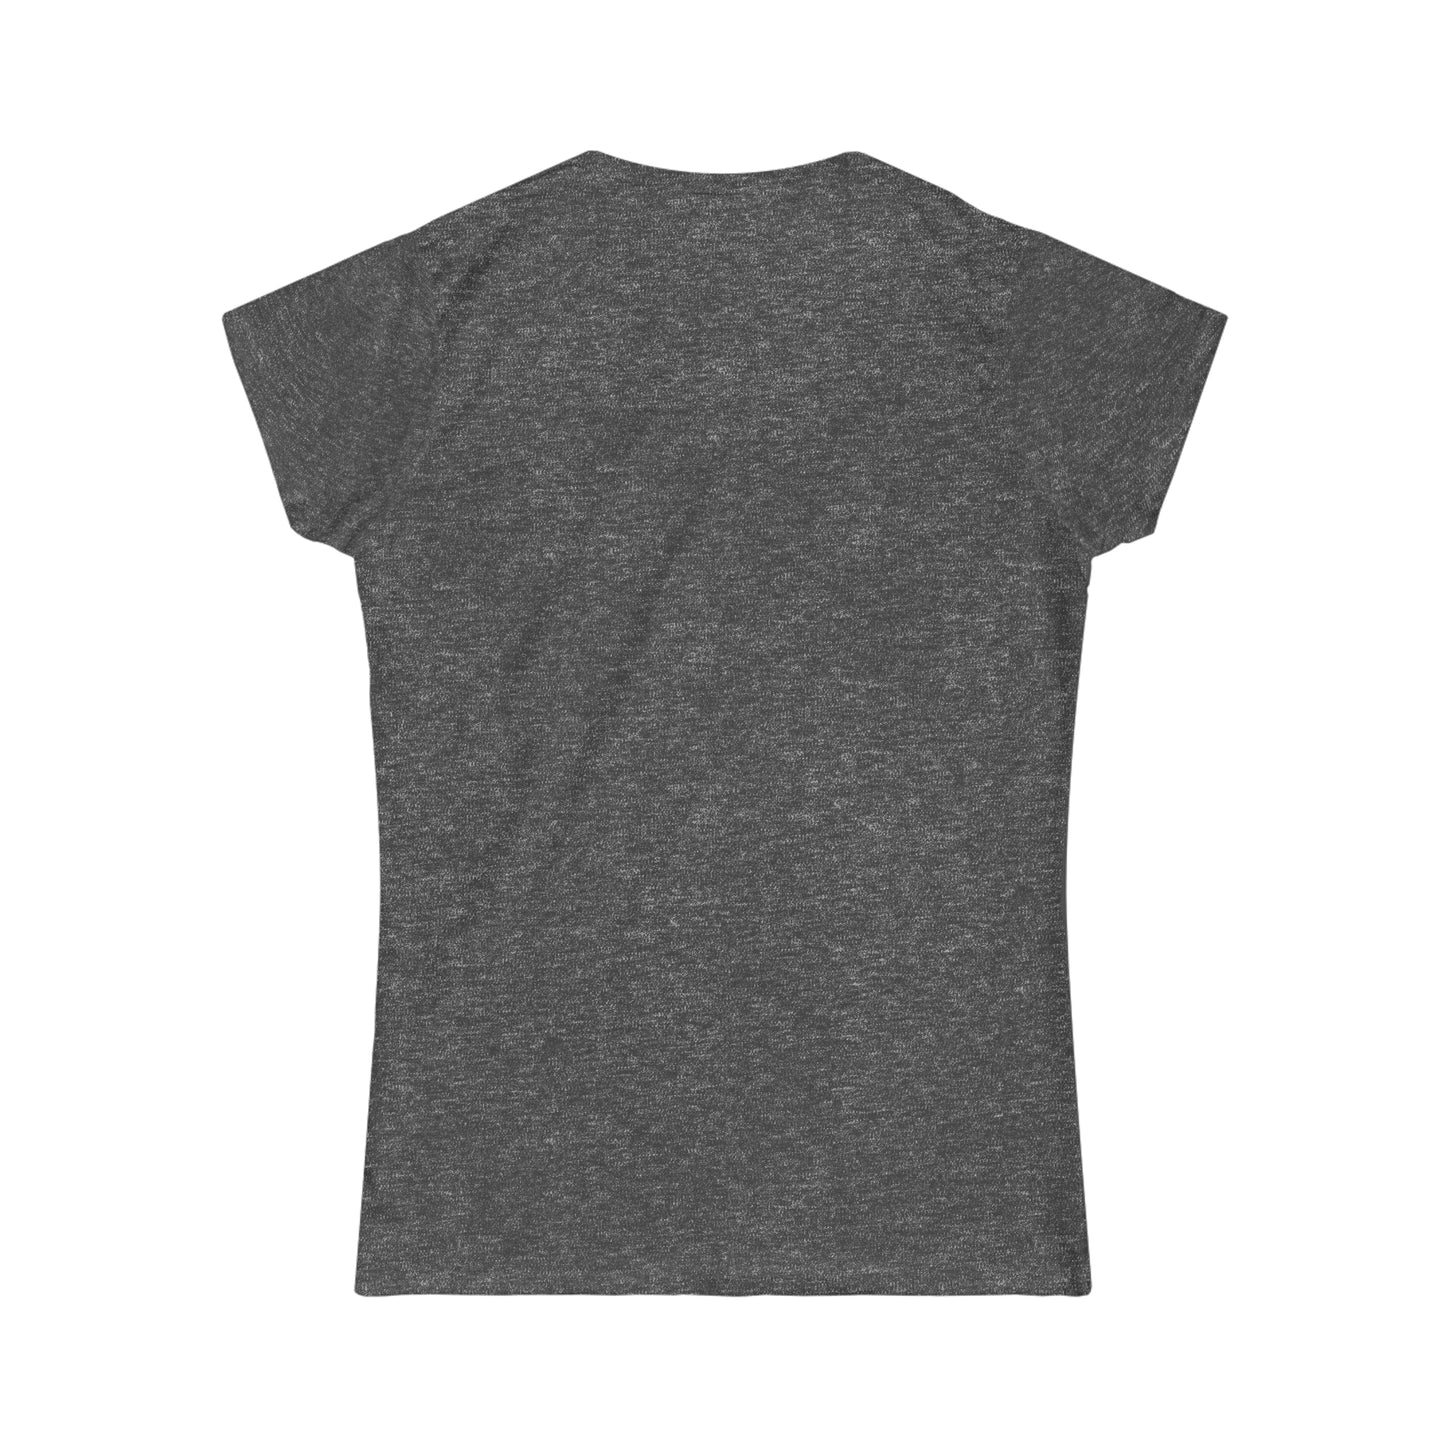 P31 - Simple Women's Softstyle Tee